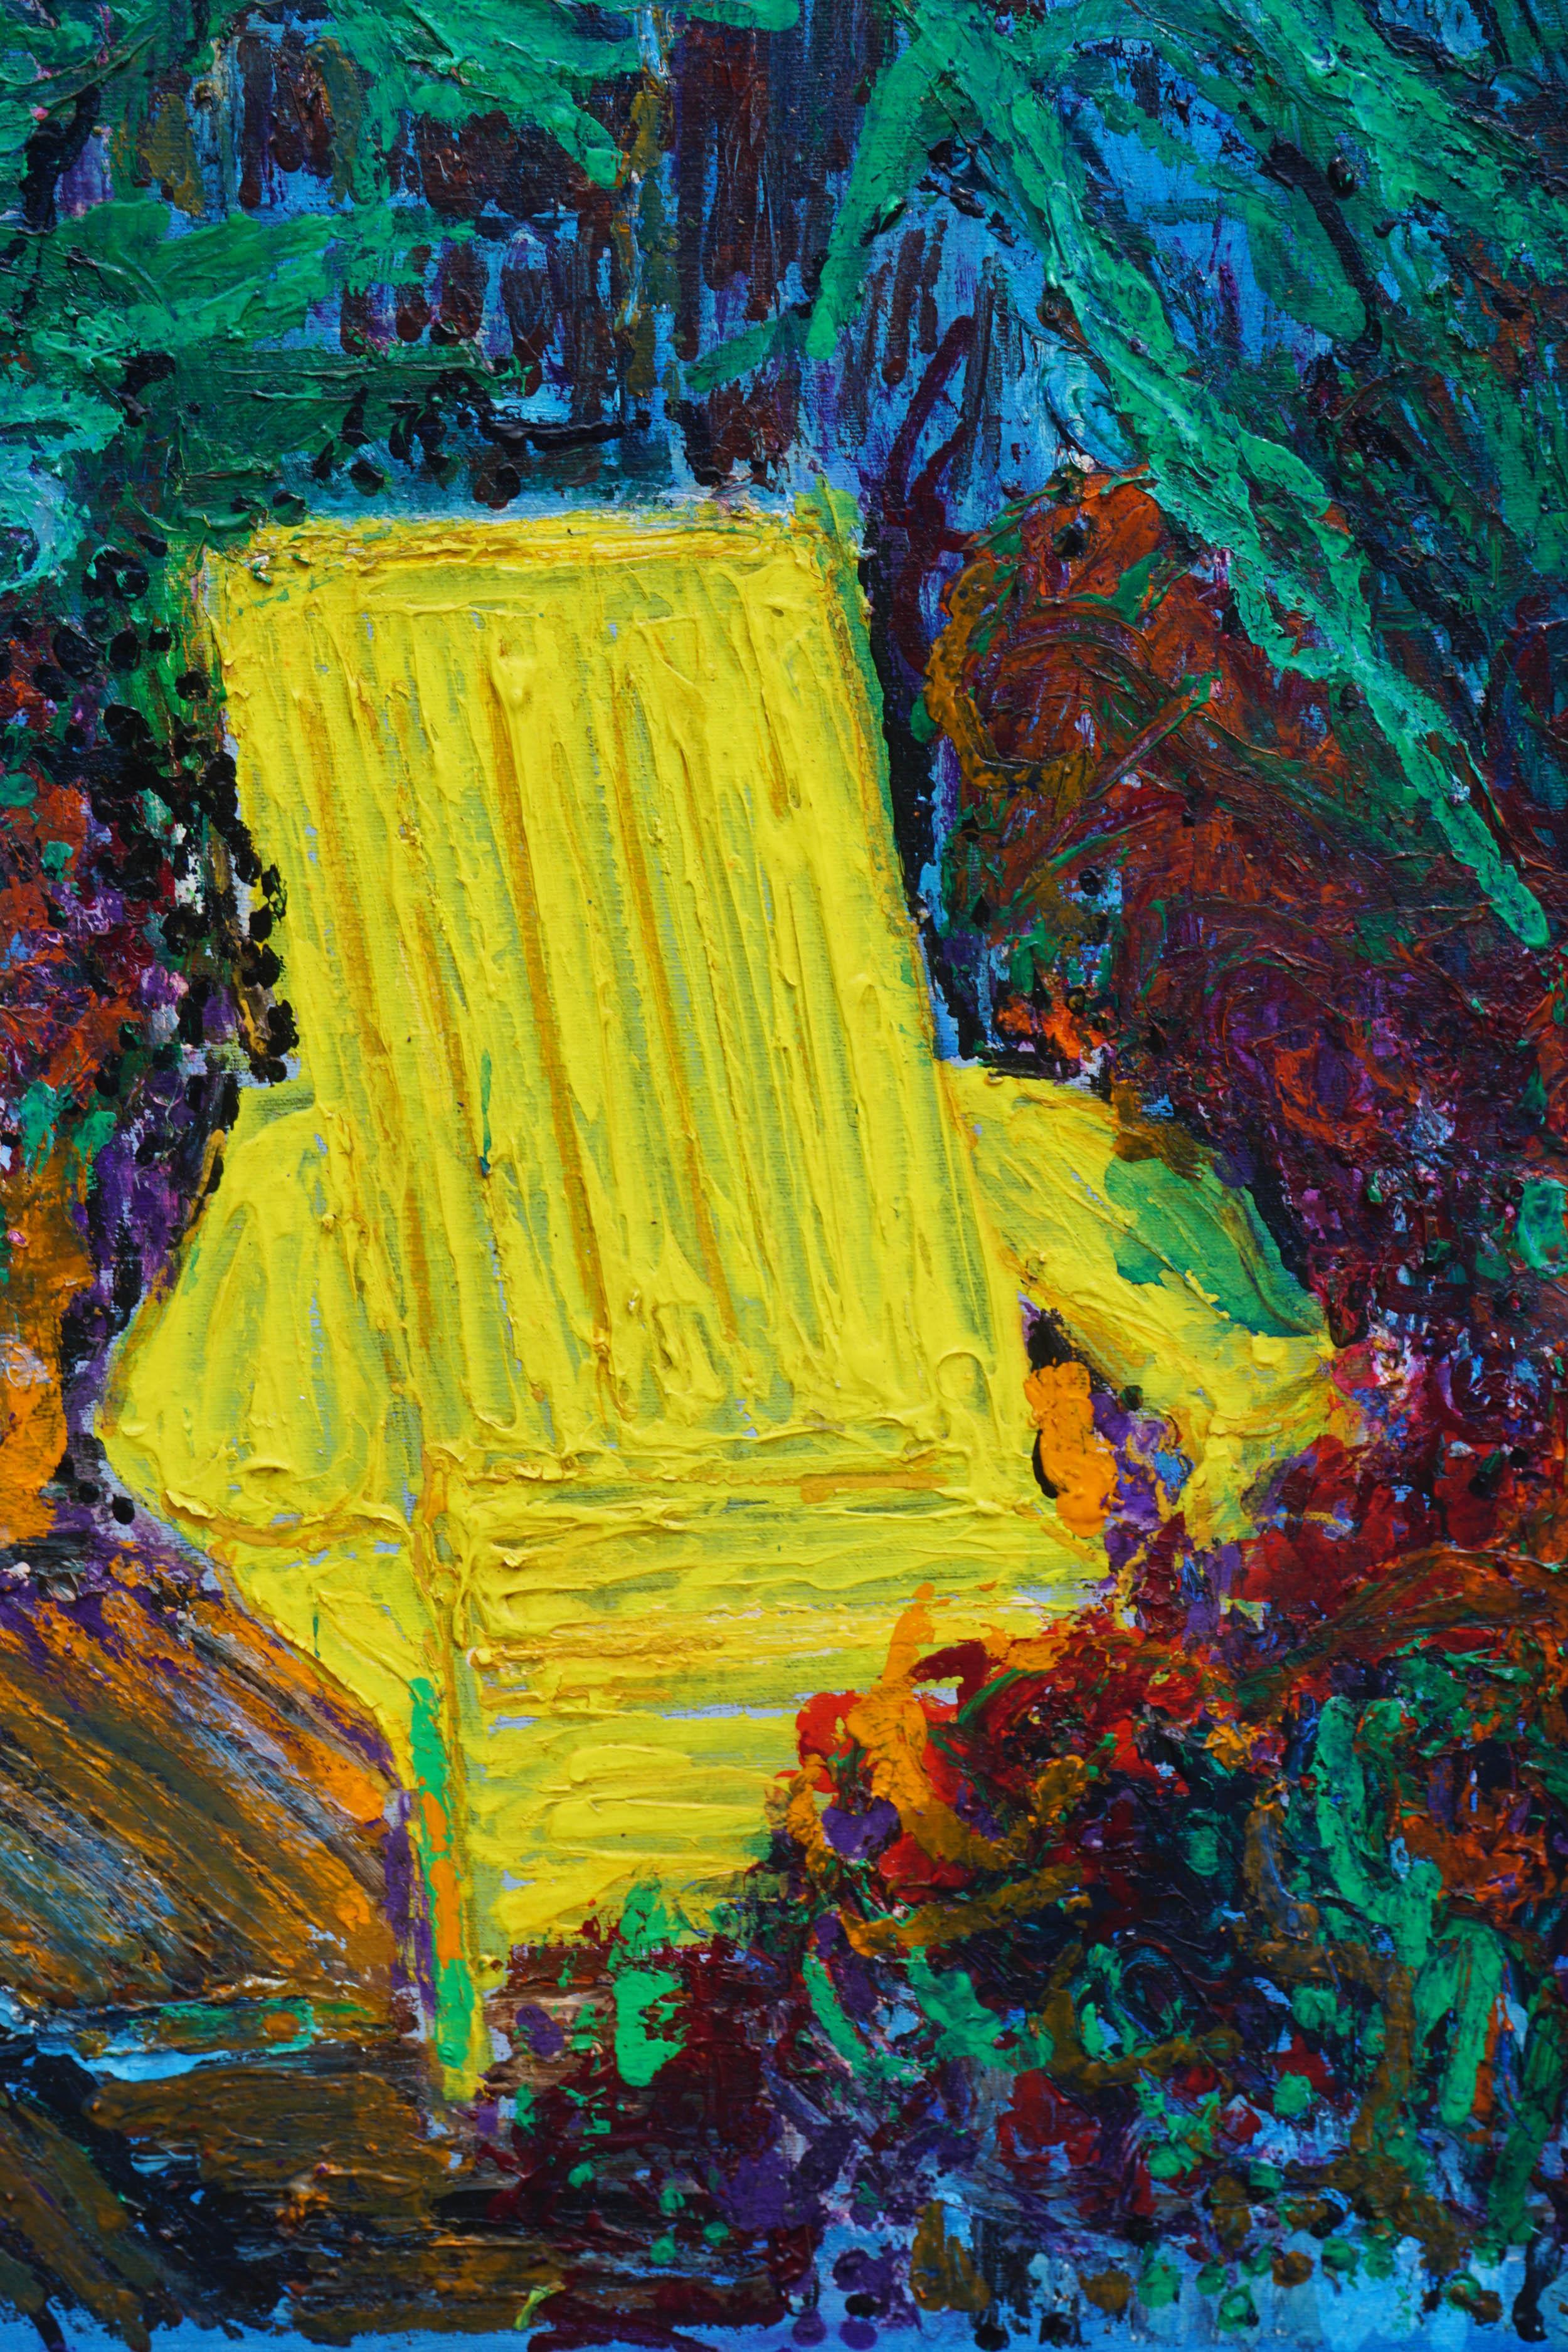 Fauvist San Francisco Nocturnal Landscape with Adirondack Chair - Painting by Allie William Skelton